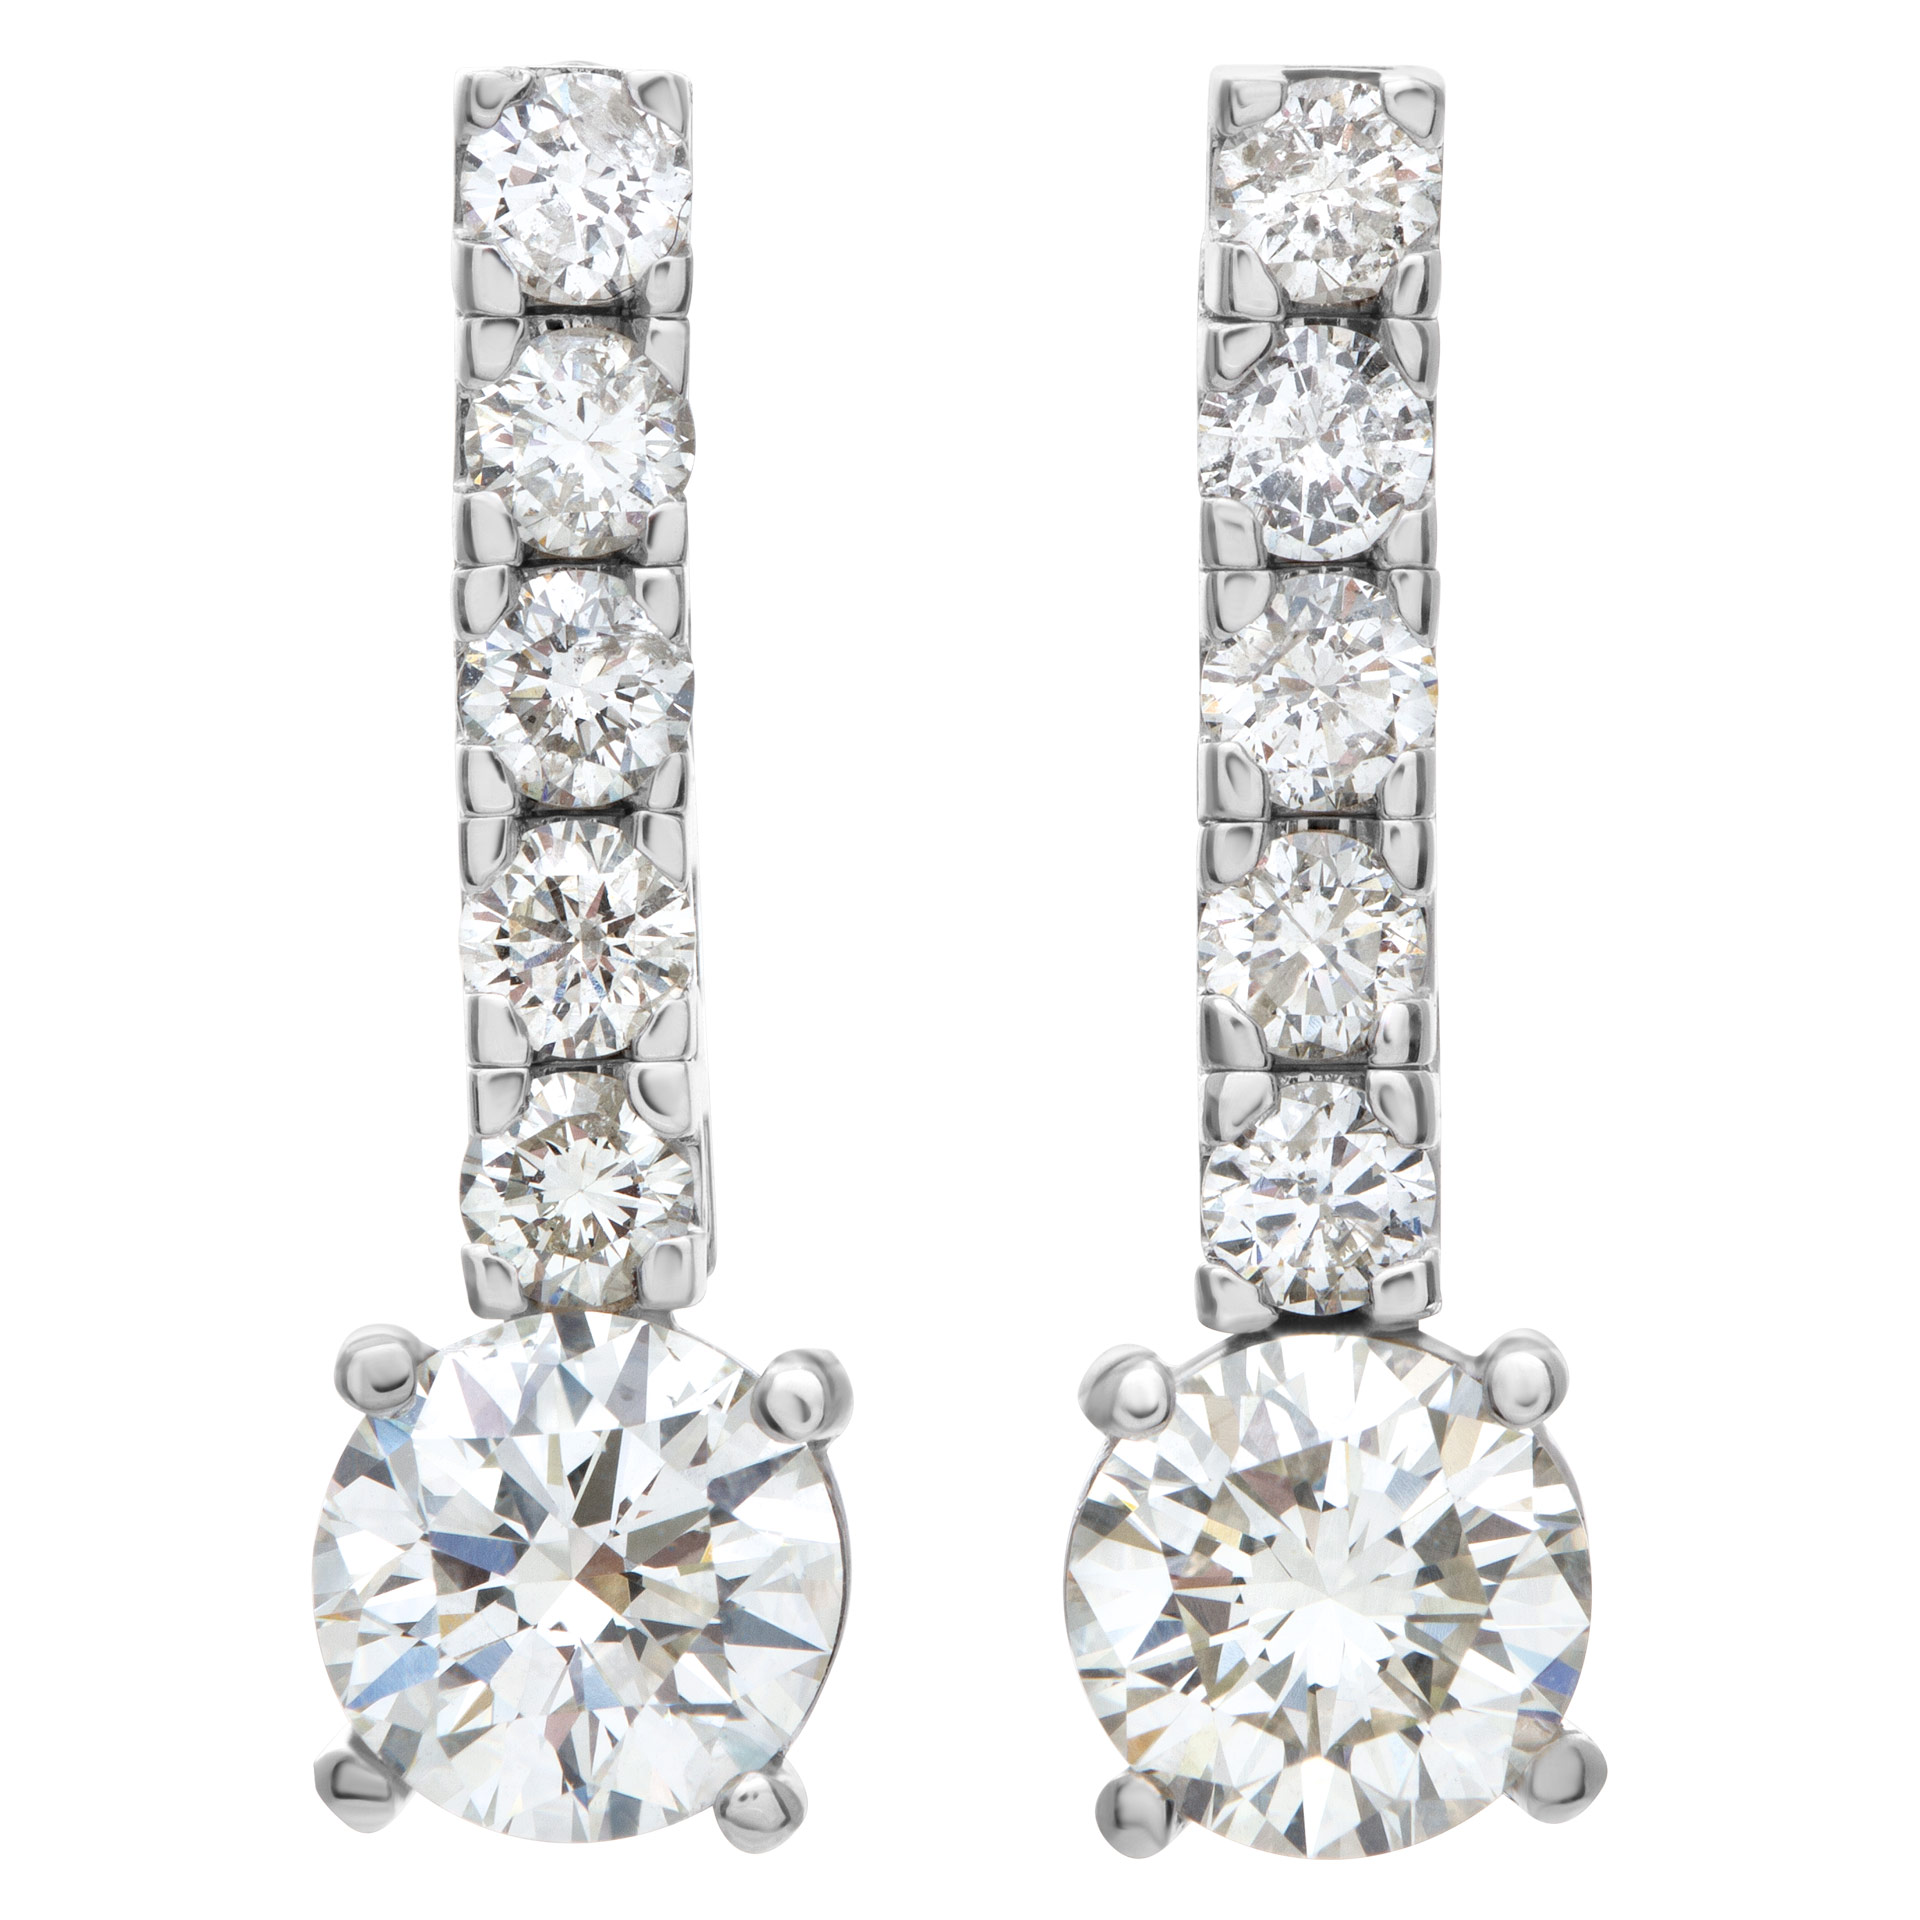 Line of diamond earrings. Approx. 1 carat each with additional 1 ct in line. image 1